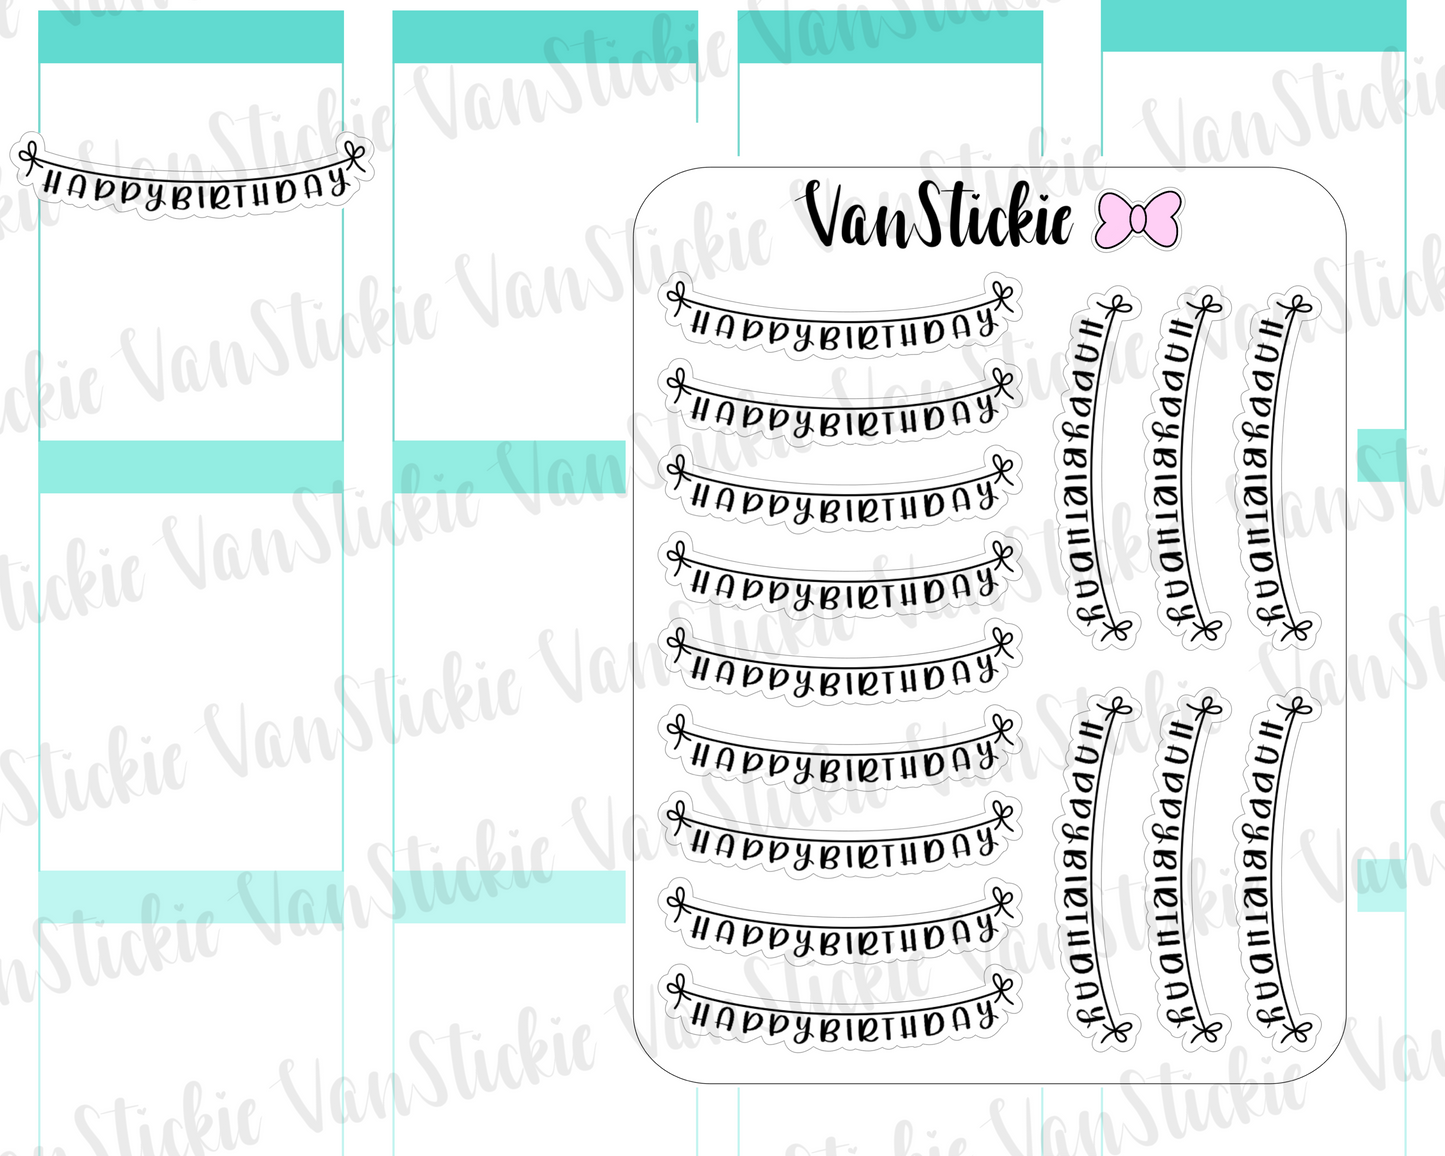 W080| Hand Lettering Stickers - "happy birthday" banner